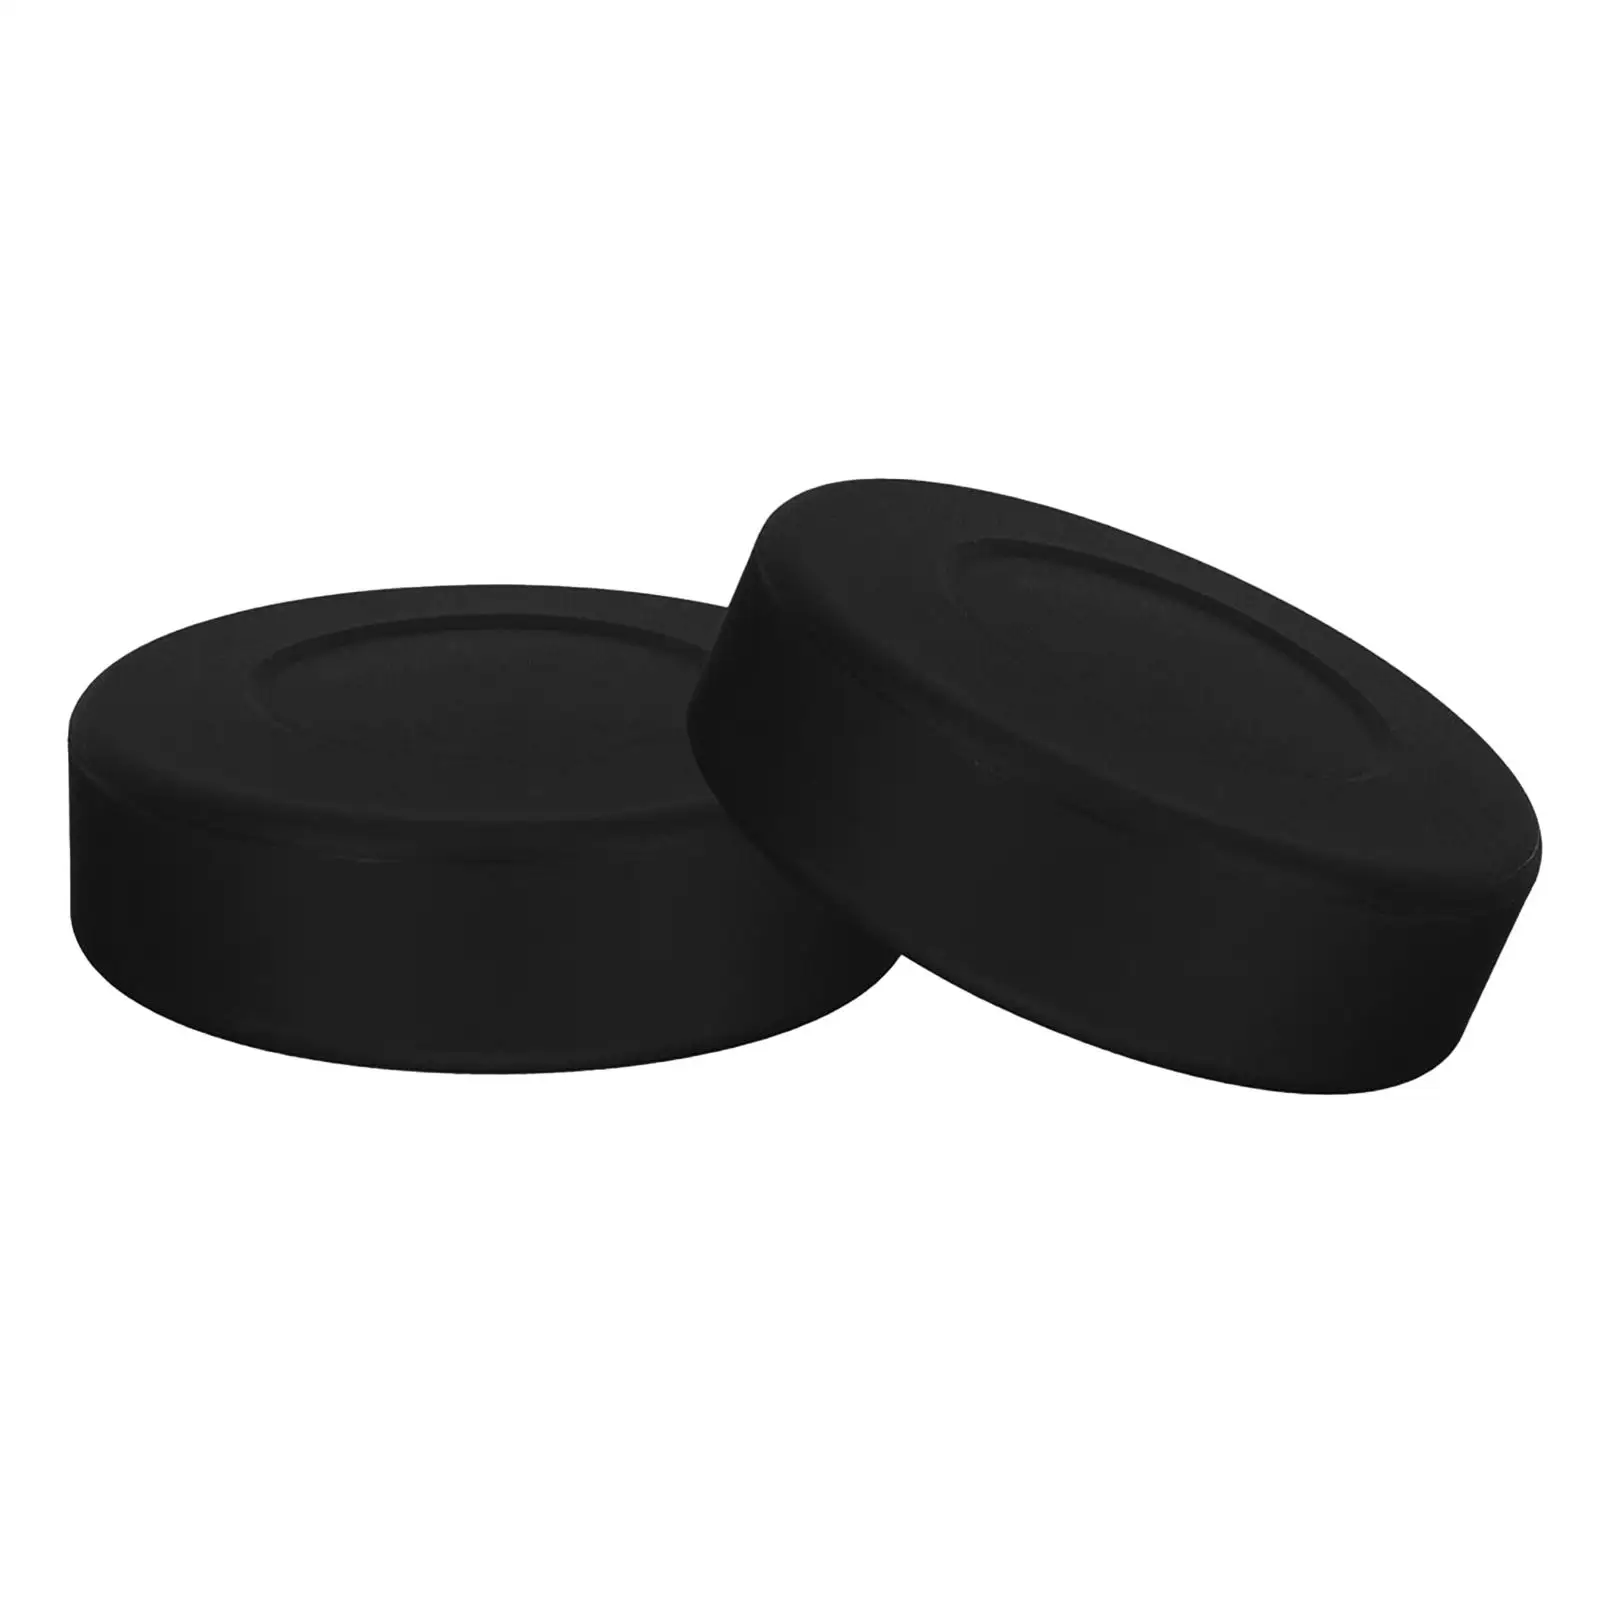 2Pcs Ice Hockey Puck Simple to Use Durable Portable Smooth Hockey Ball for Children Professionals Beginners Competition Exercise